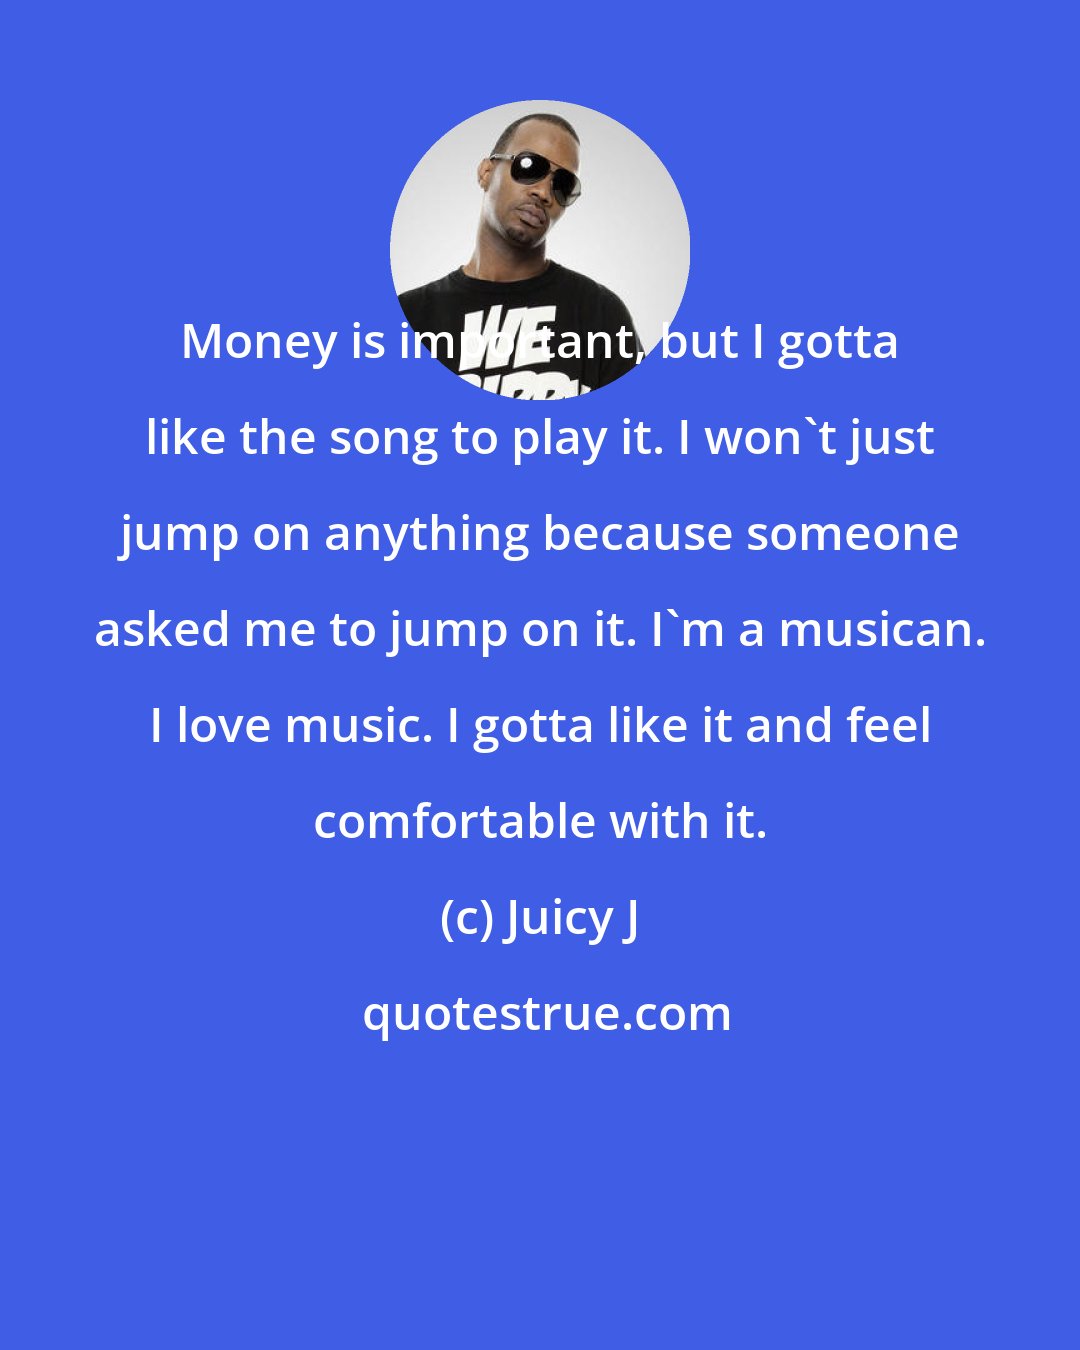 Juicy J: Money is important, but I gotta like the song to play it. I won't just jump on anything because someone asked me to jump on it. I'm a musican. I love music. I gotta like it and feel comfortable with it.